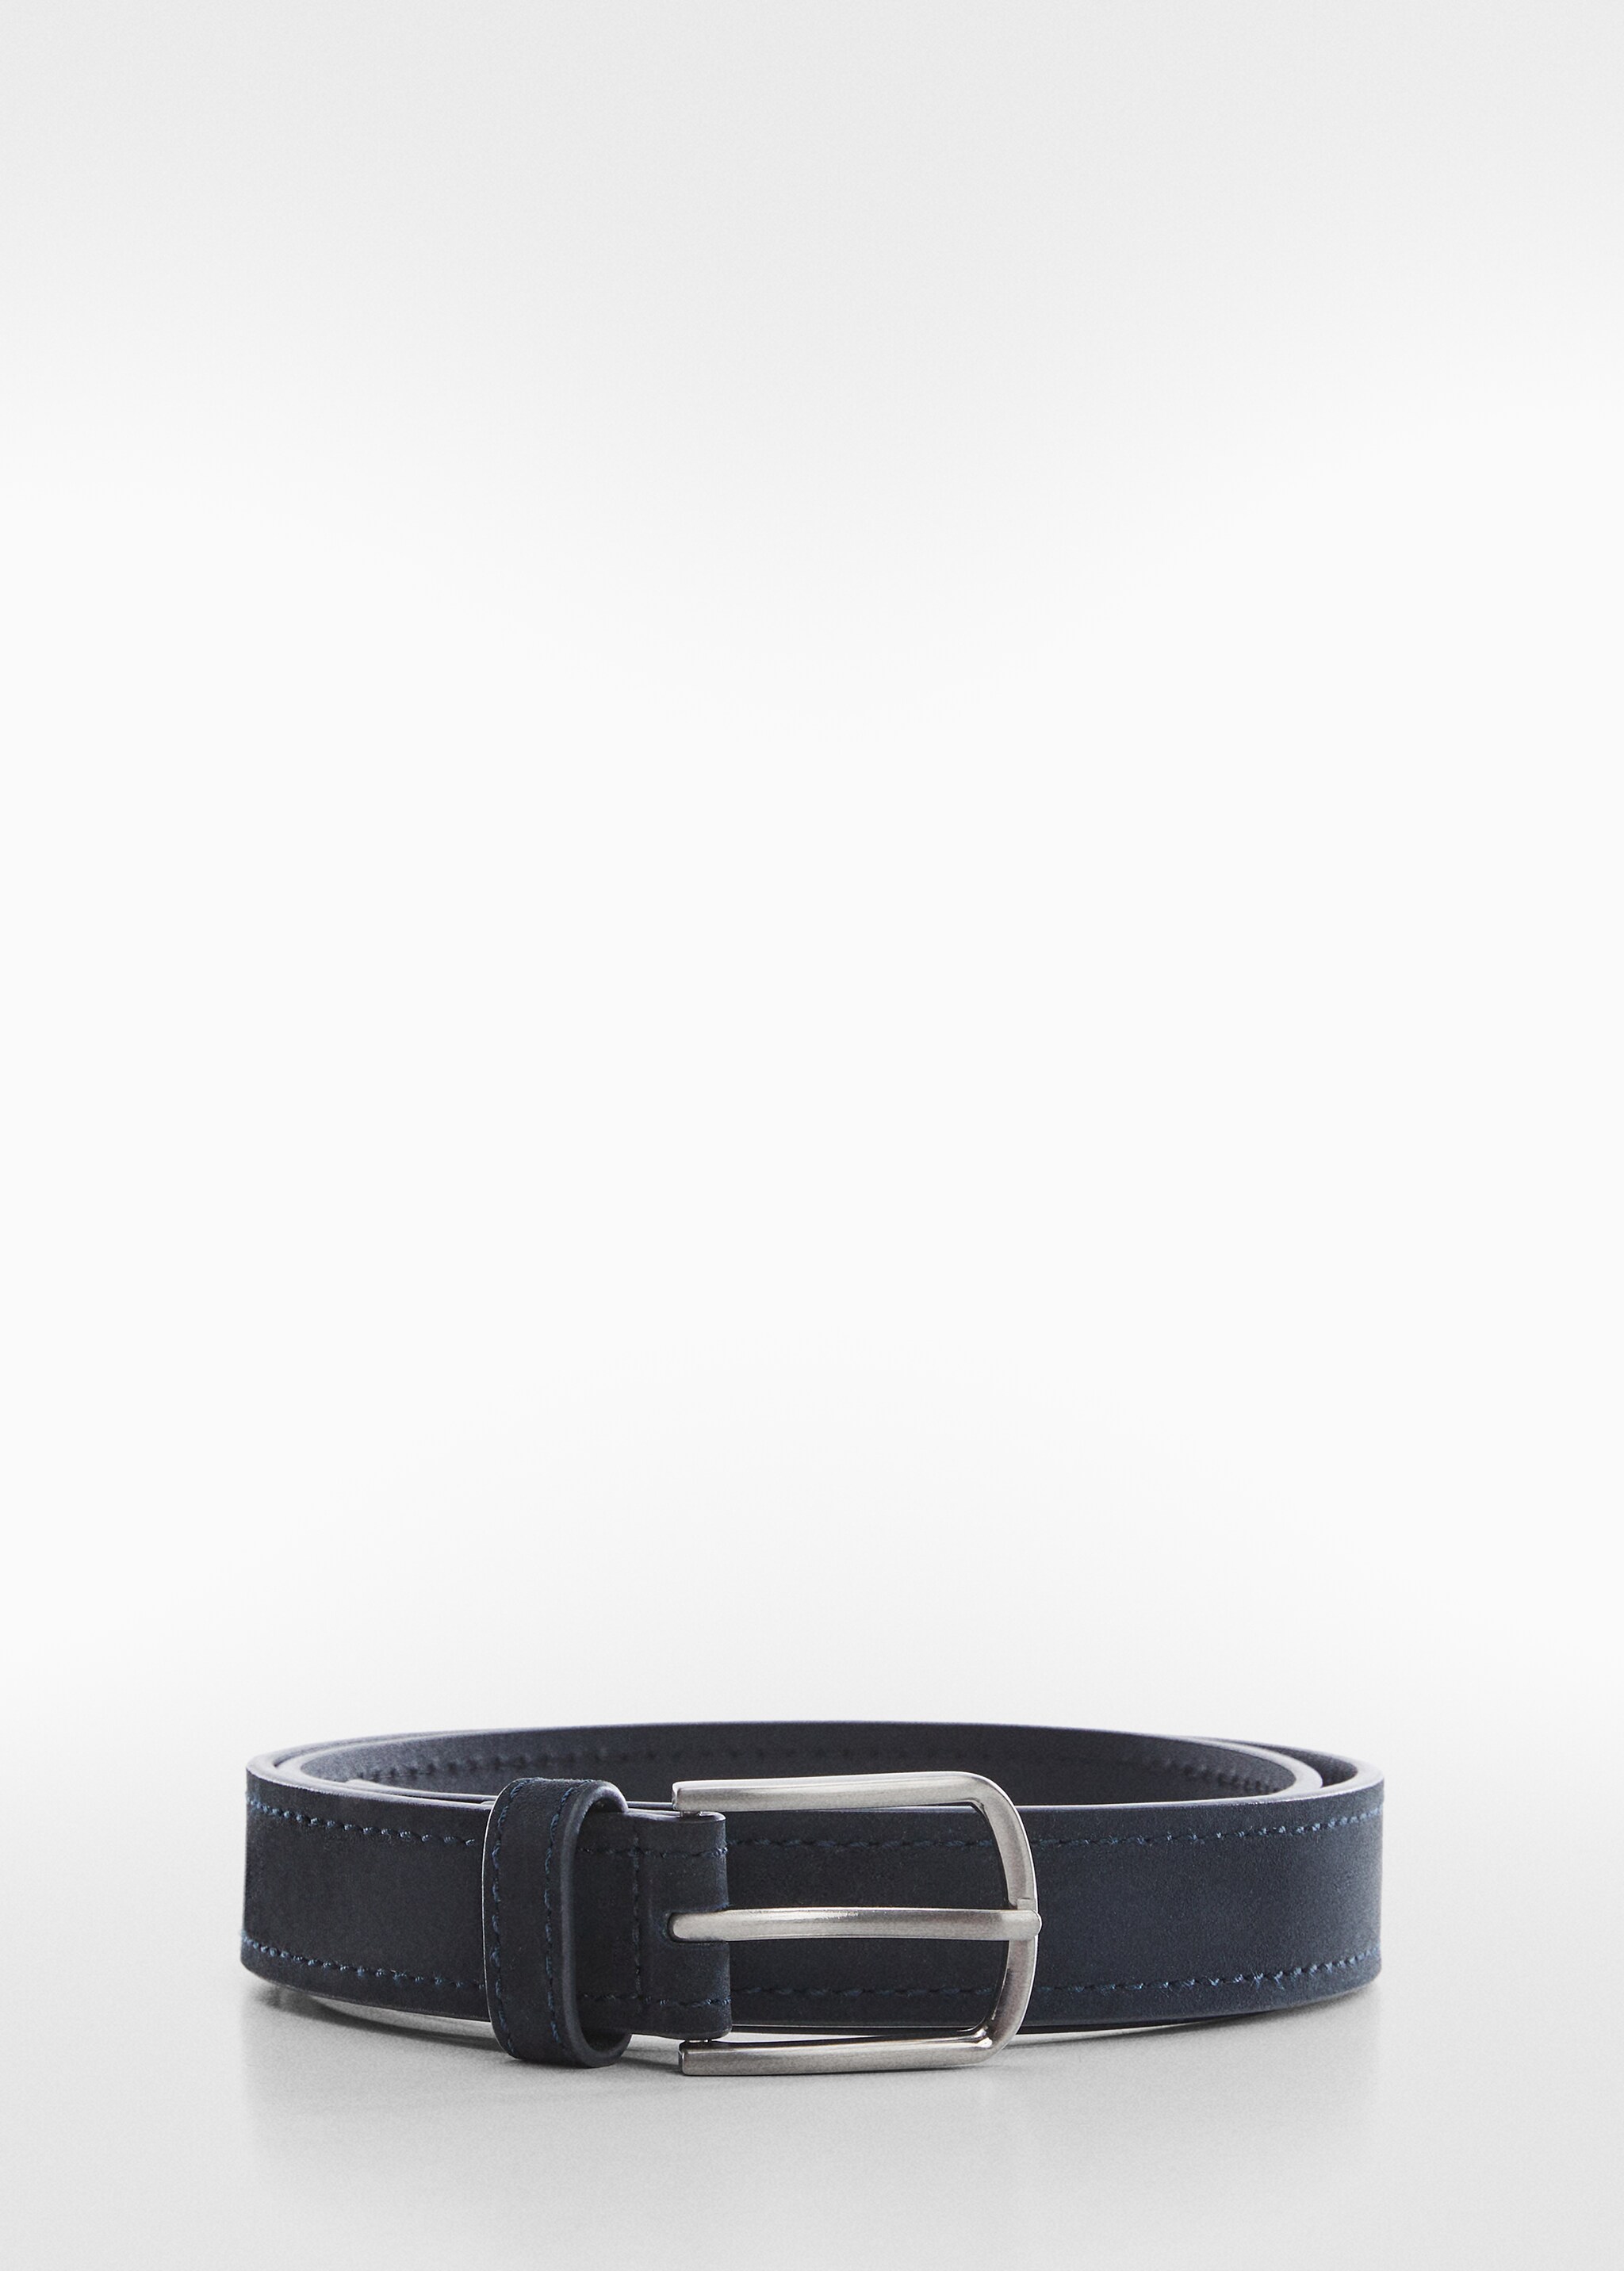 Suede leather belt - Article without model